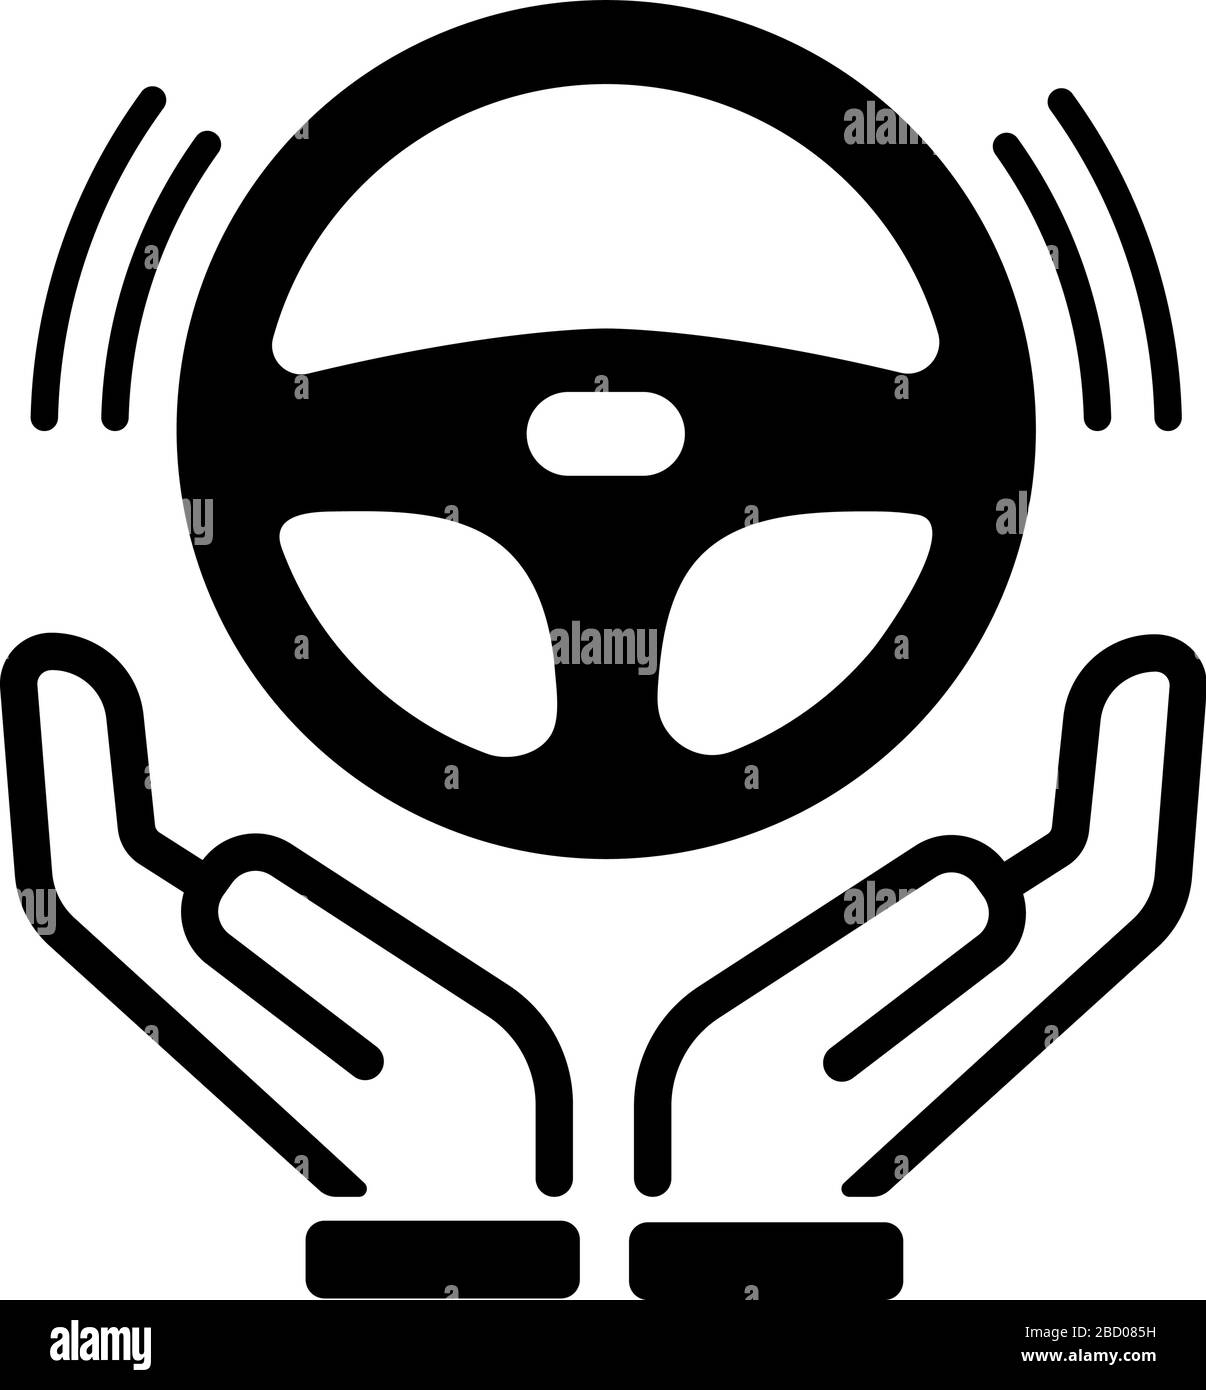 Self-driving, driverless, automatic driving vector icon illustration Stock Vector